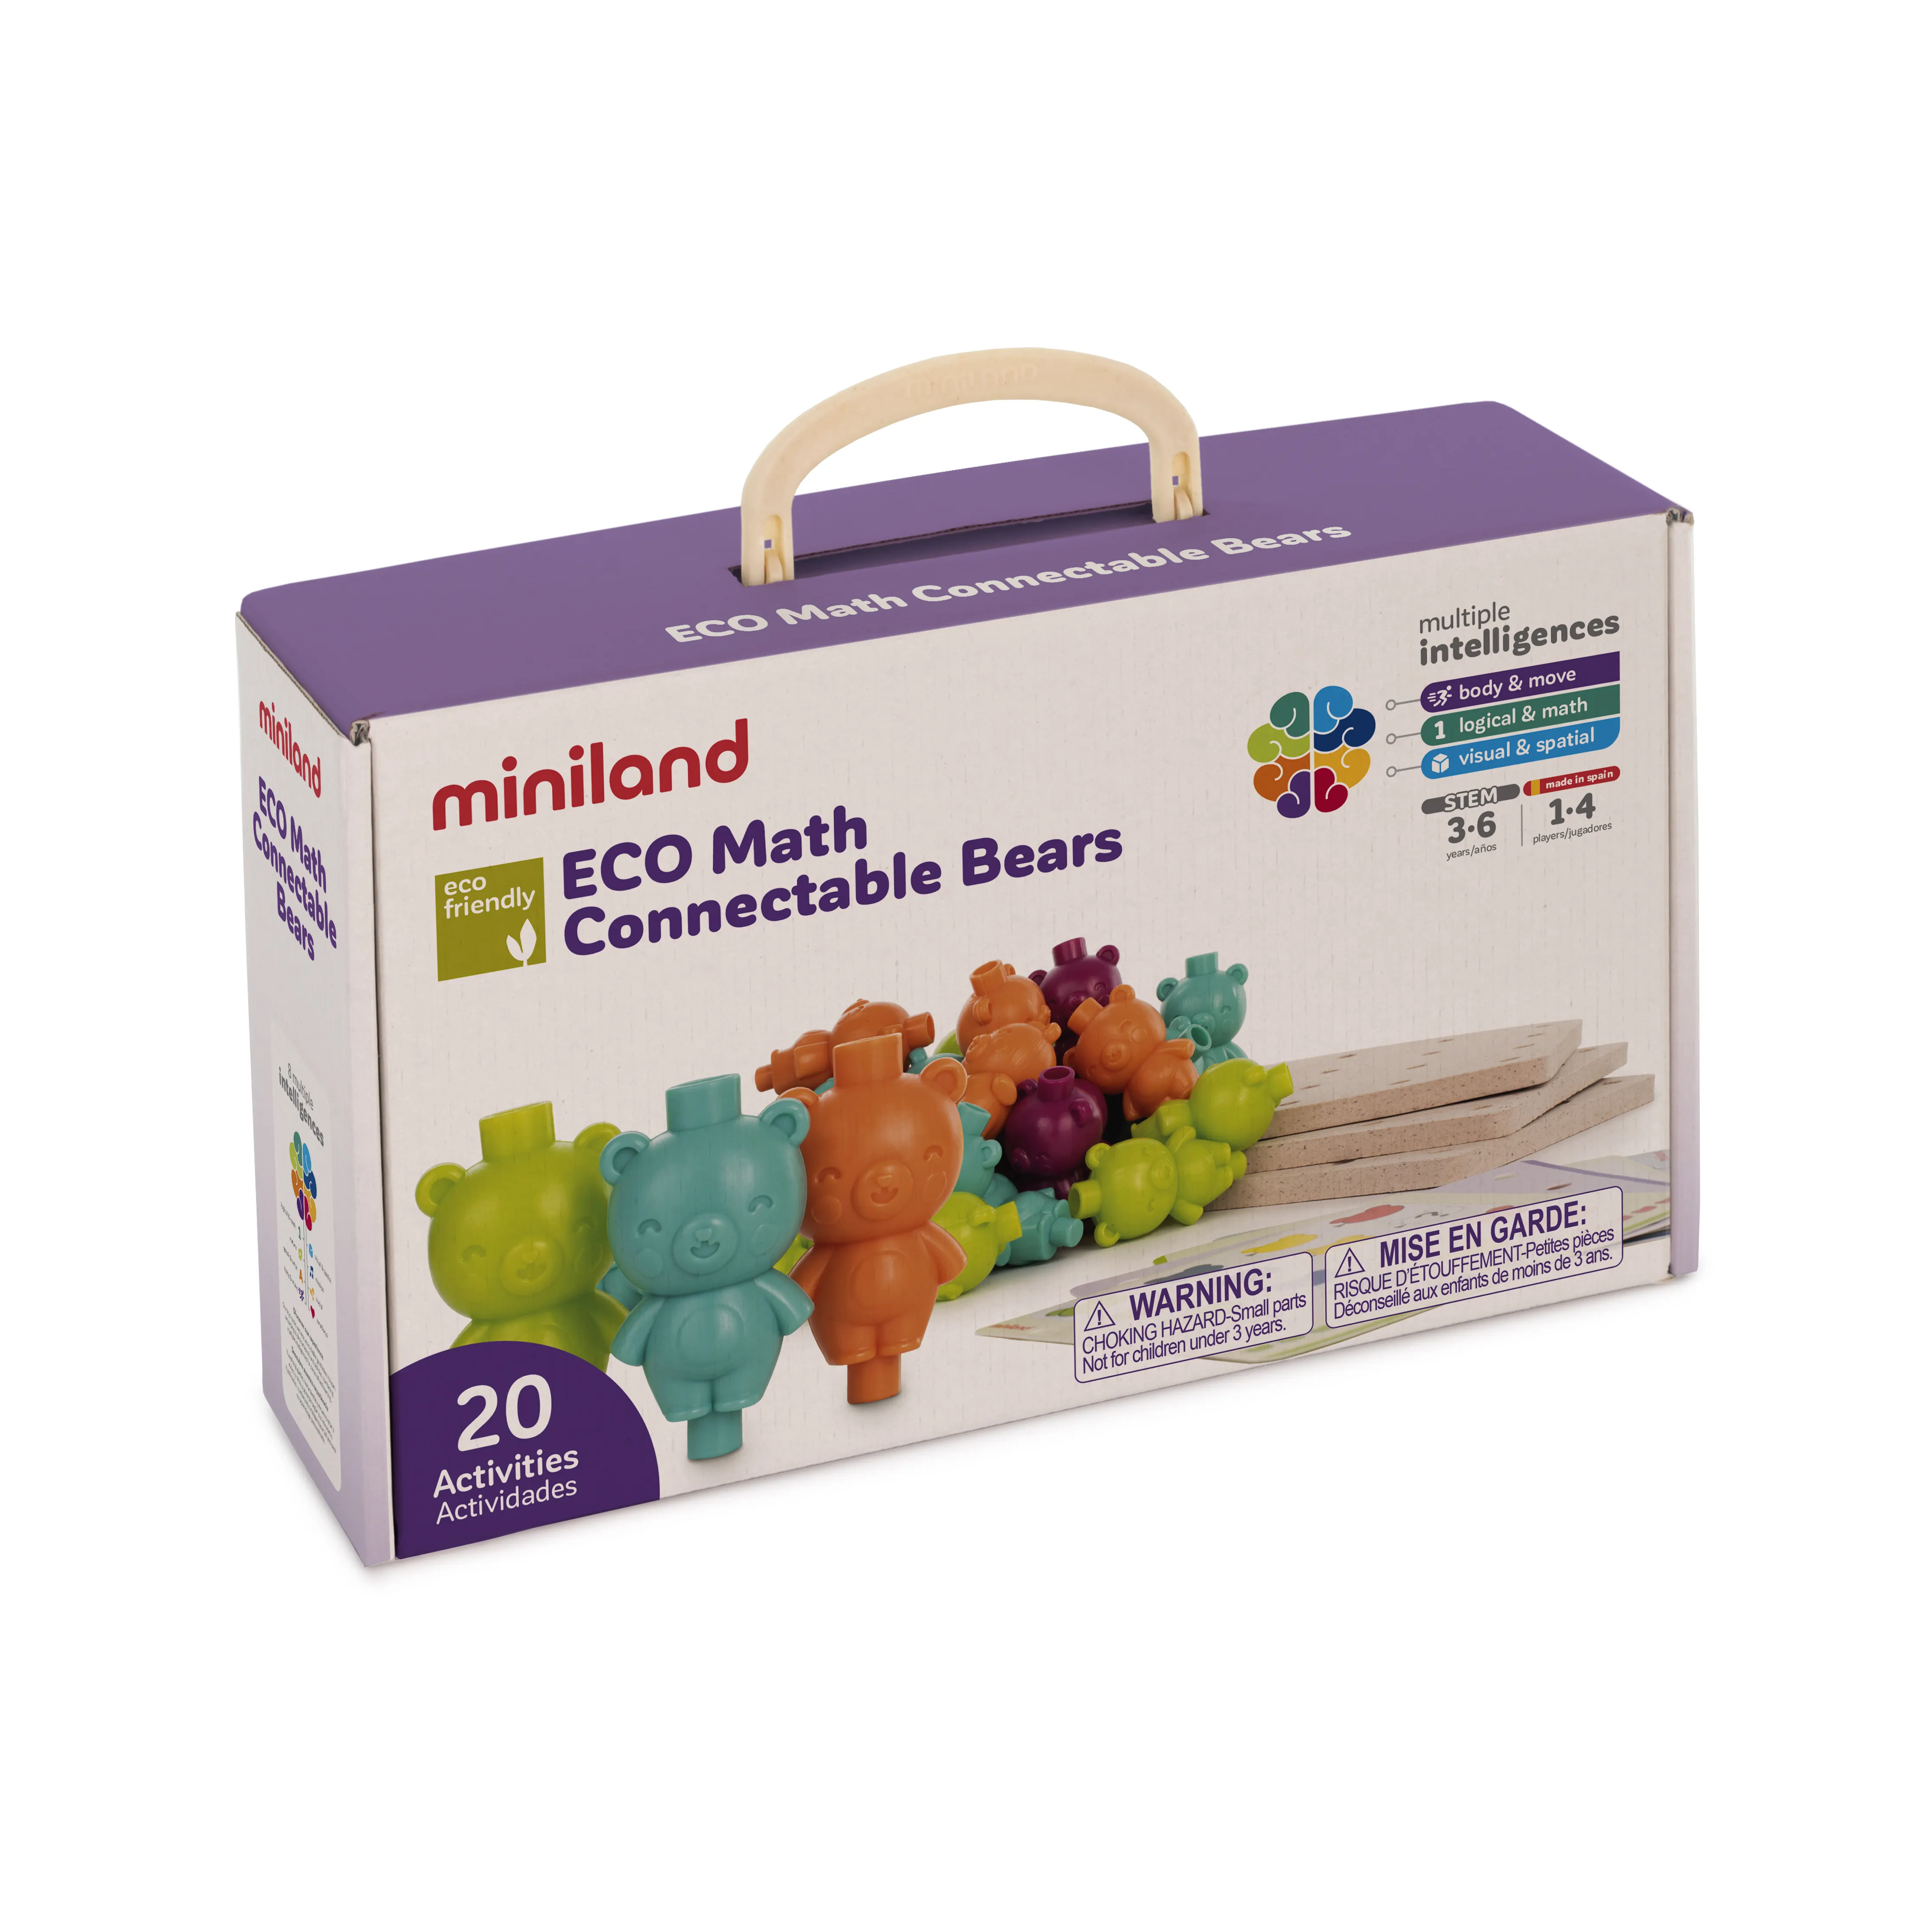 Miniland ECO Math Connectable Bears (20 pieces) 4 cm Spanish high quality toy for child's mathematics development